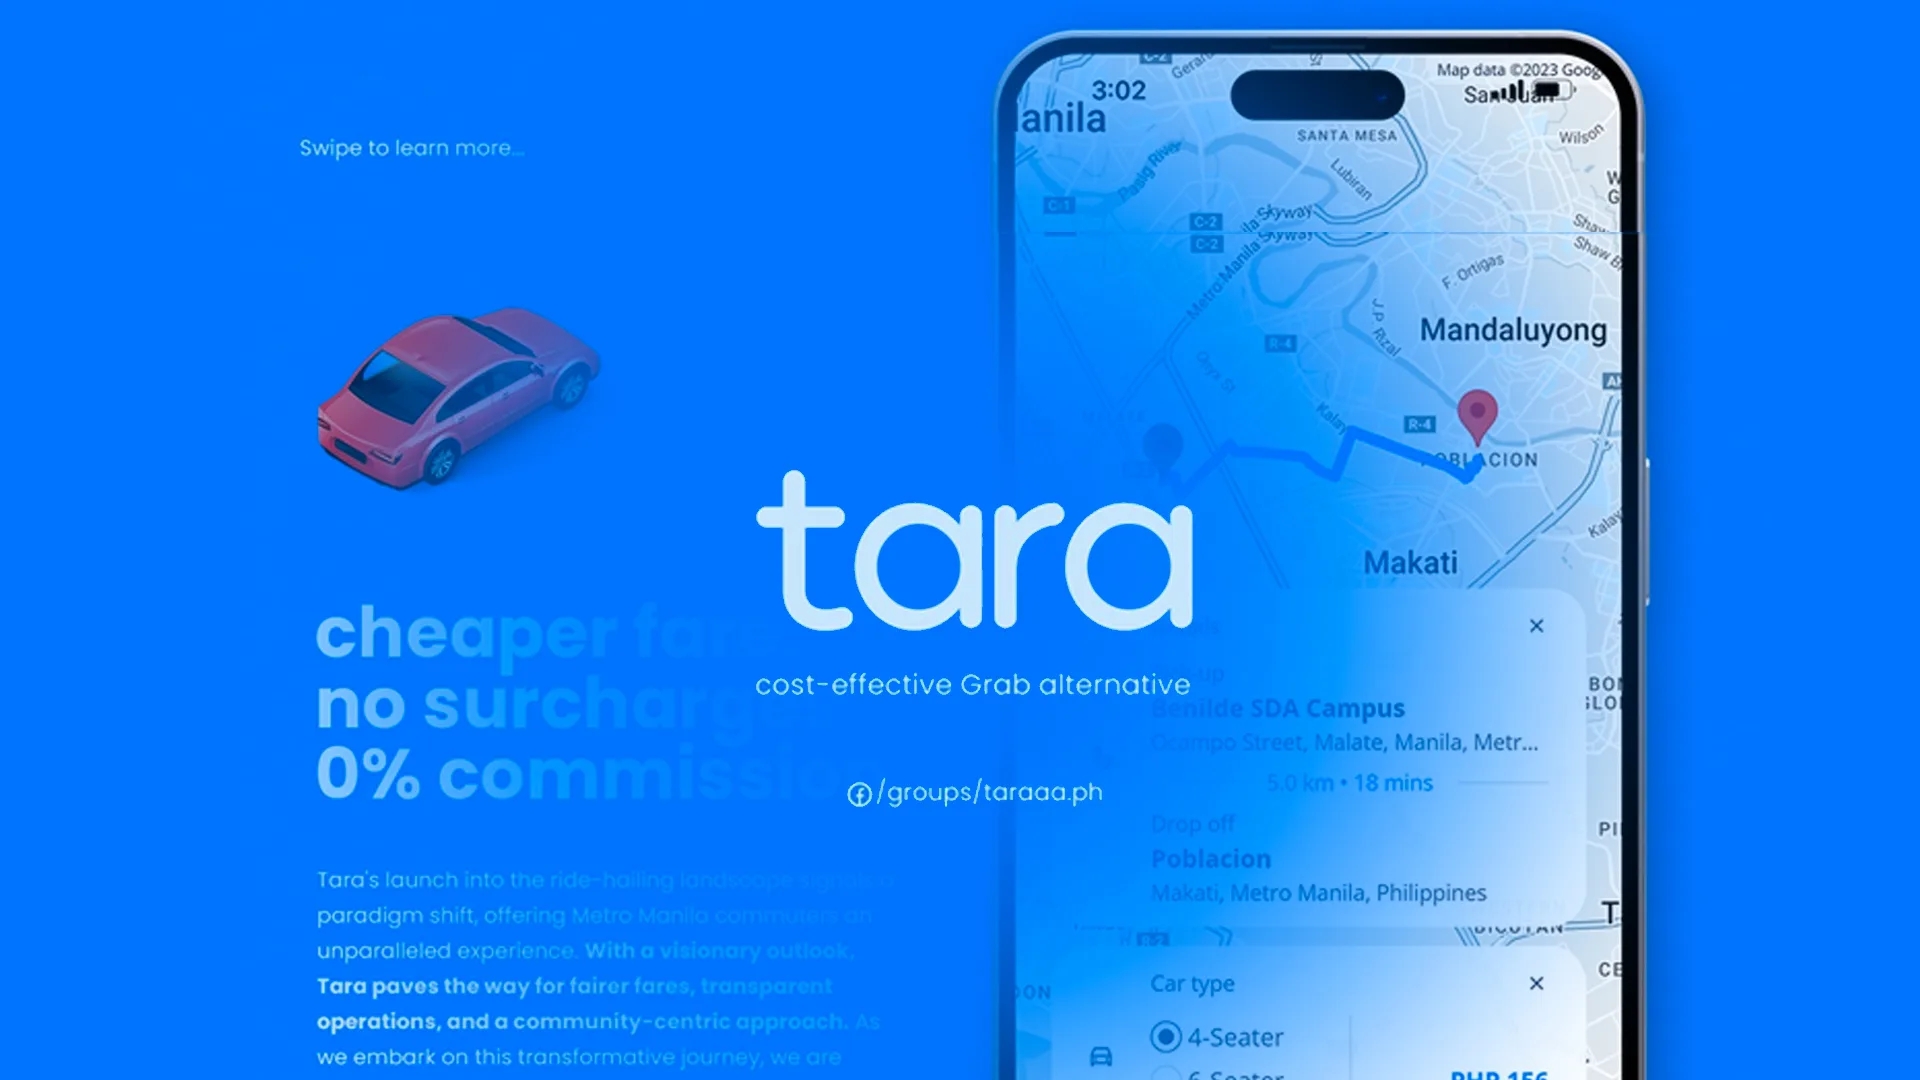 Tara, a ride-hailing service, has been launched as a less expensive alternative to Grab.